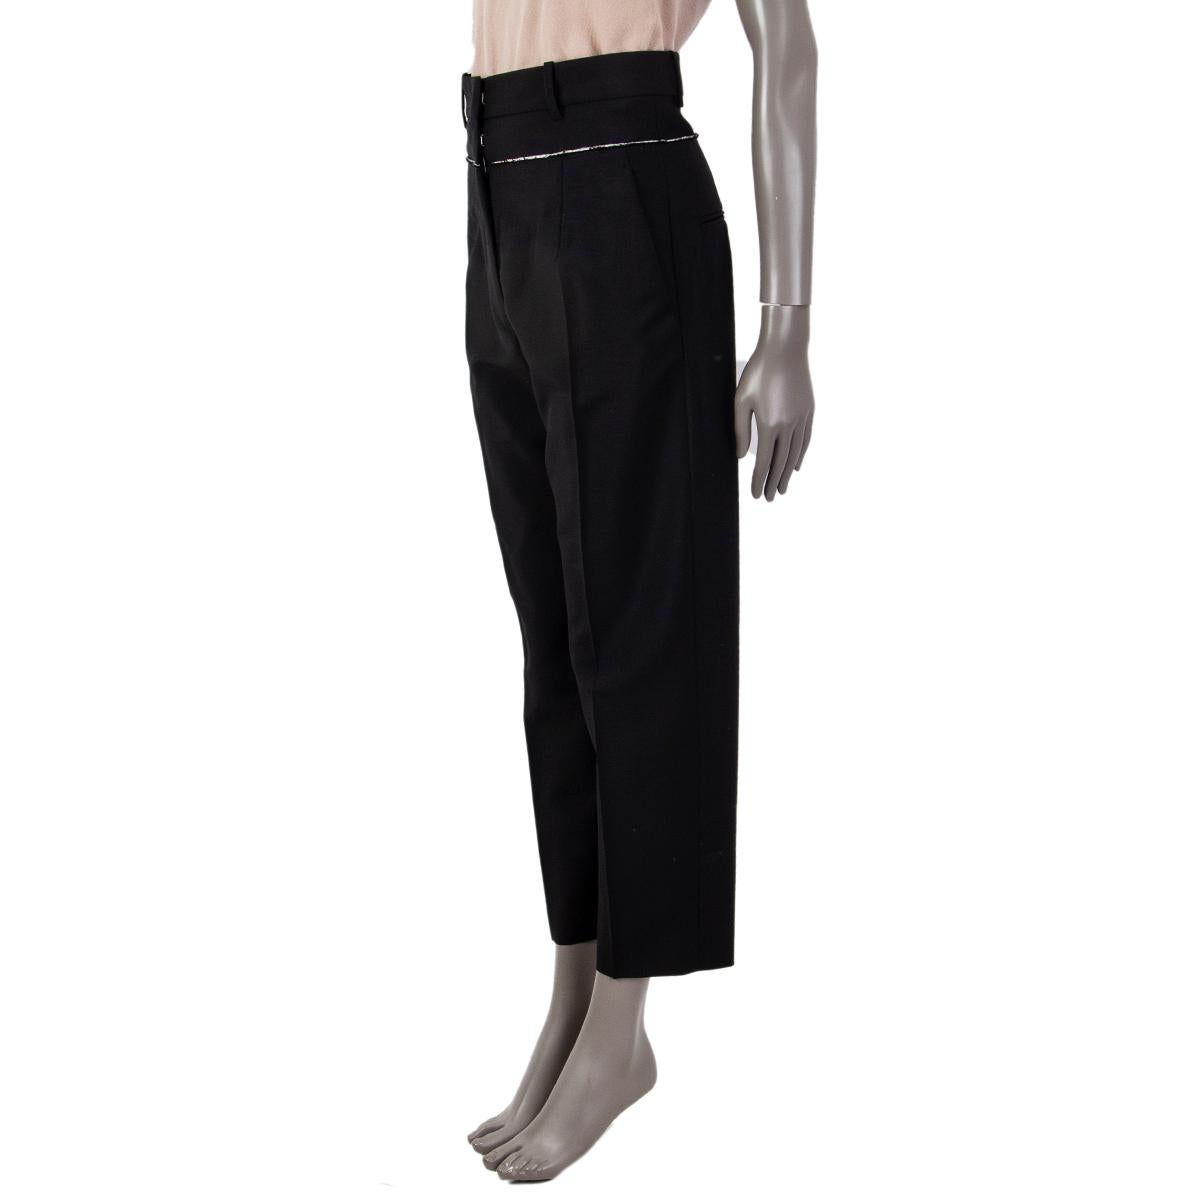 100% authentic Jil Sander high-waist suit pants in black wool (73%) and mohair (27%) with off-white trim at waist. Concealed zipper, hook and bar closure at waistand. Two side pockets and two welt pockets at the back. Unlined. Have been worn once